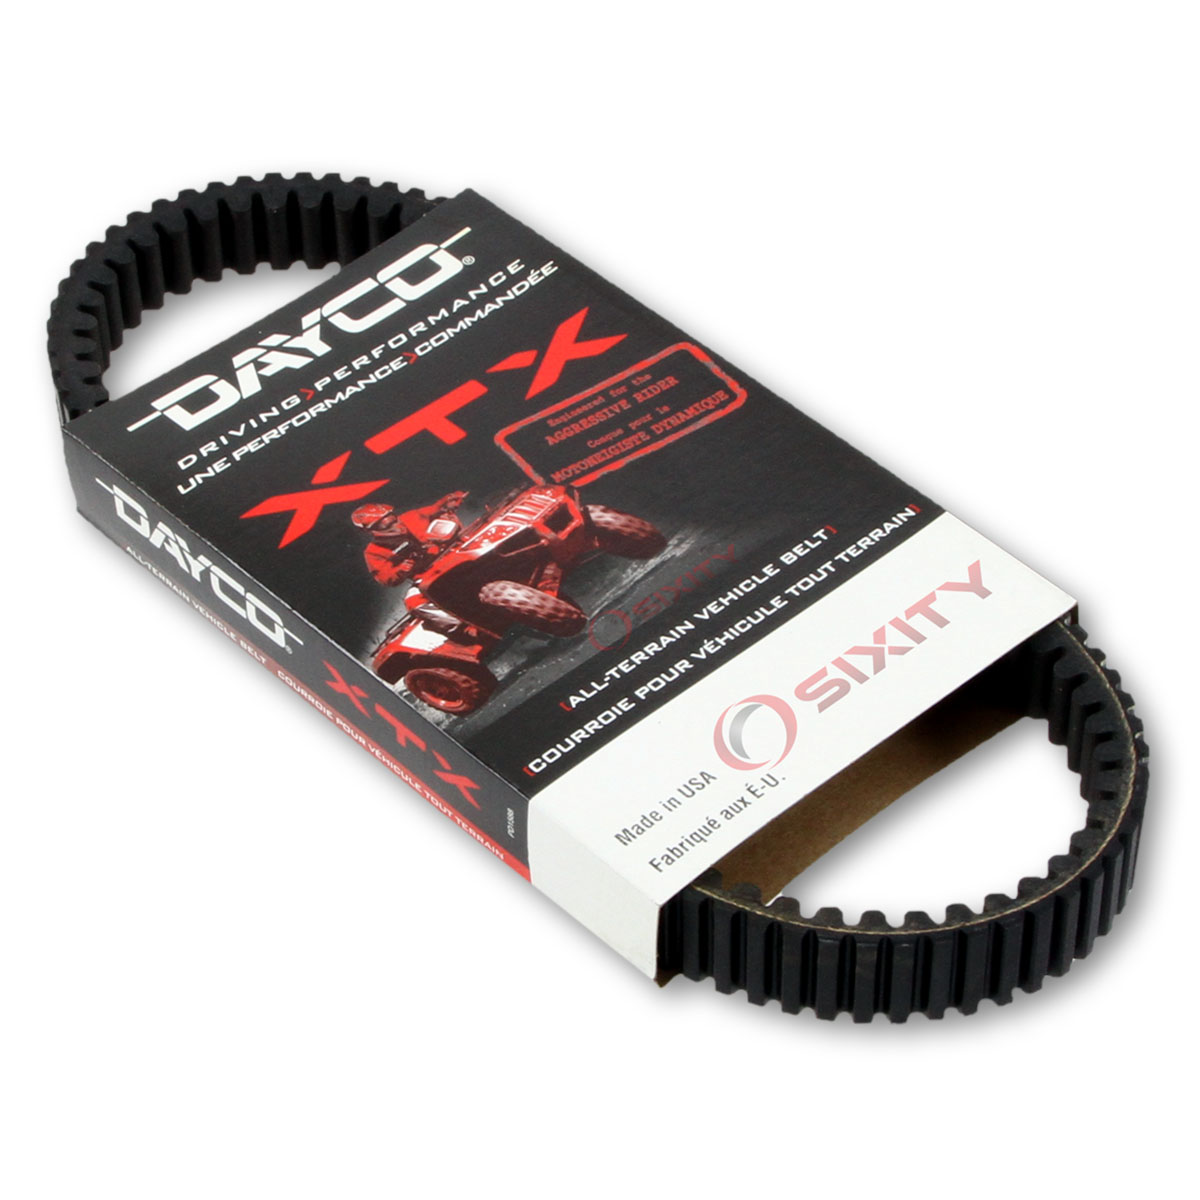 Dayco XTX Drive Belt for 2009-2011 Arctic Cat 1000 TRV Cruiser - Extreme